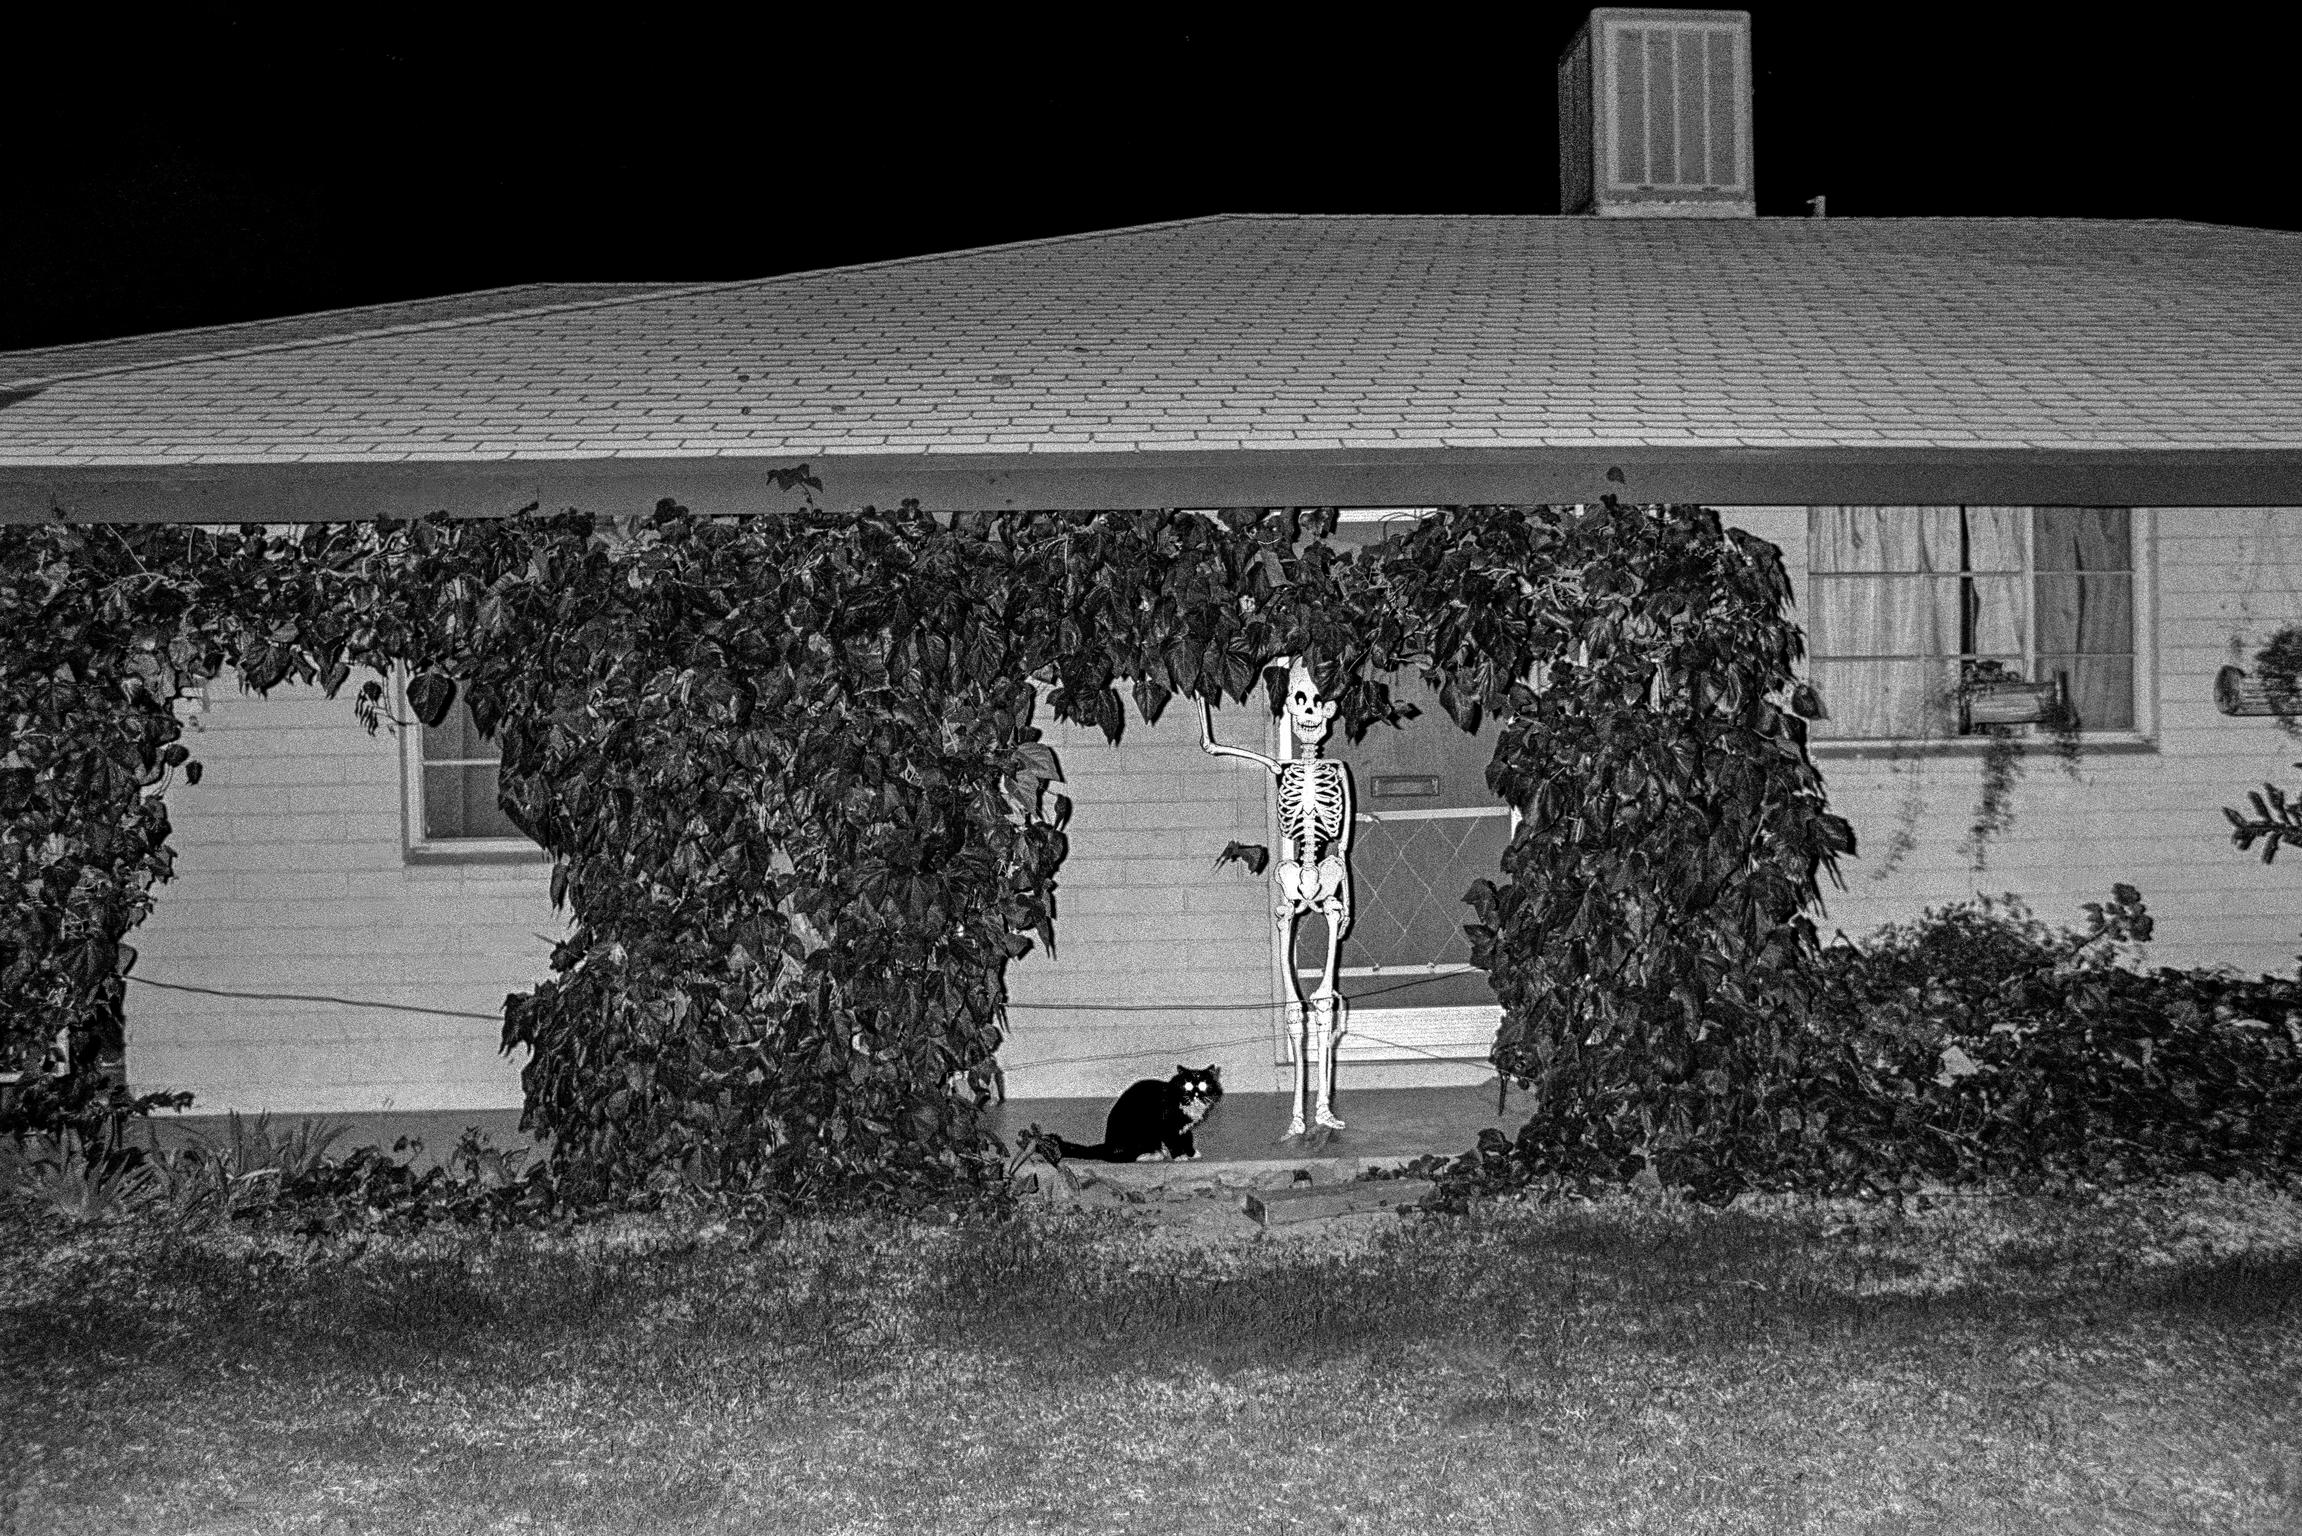 Surreal pair guard a house during Halloween in Tempe, Arizona USA